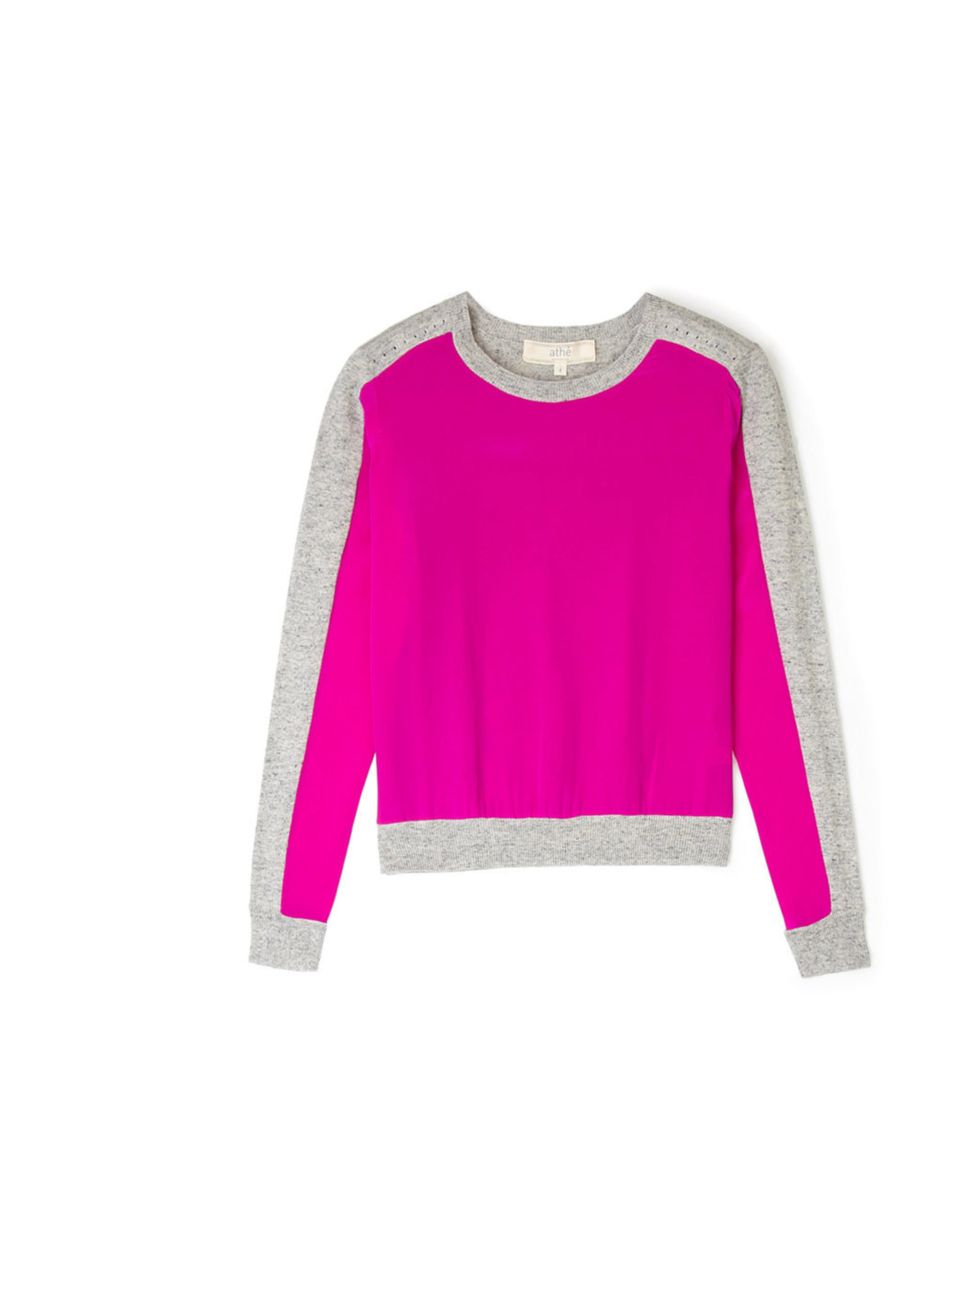 <p>Sports-luxe takes a feminine turn this season so mix ladylike colour with modern cuts... Vanessa Bruno panel jumper, £140, at My-Wardrobe</p><p><a href="http://shopping.elleuk.com/browse?fts=vanessa+bruno+jumper+my-wardrobe">BUY NOW</a></p>